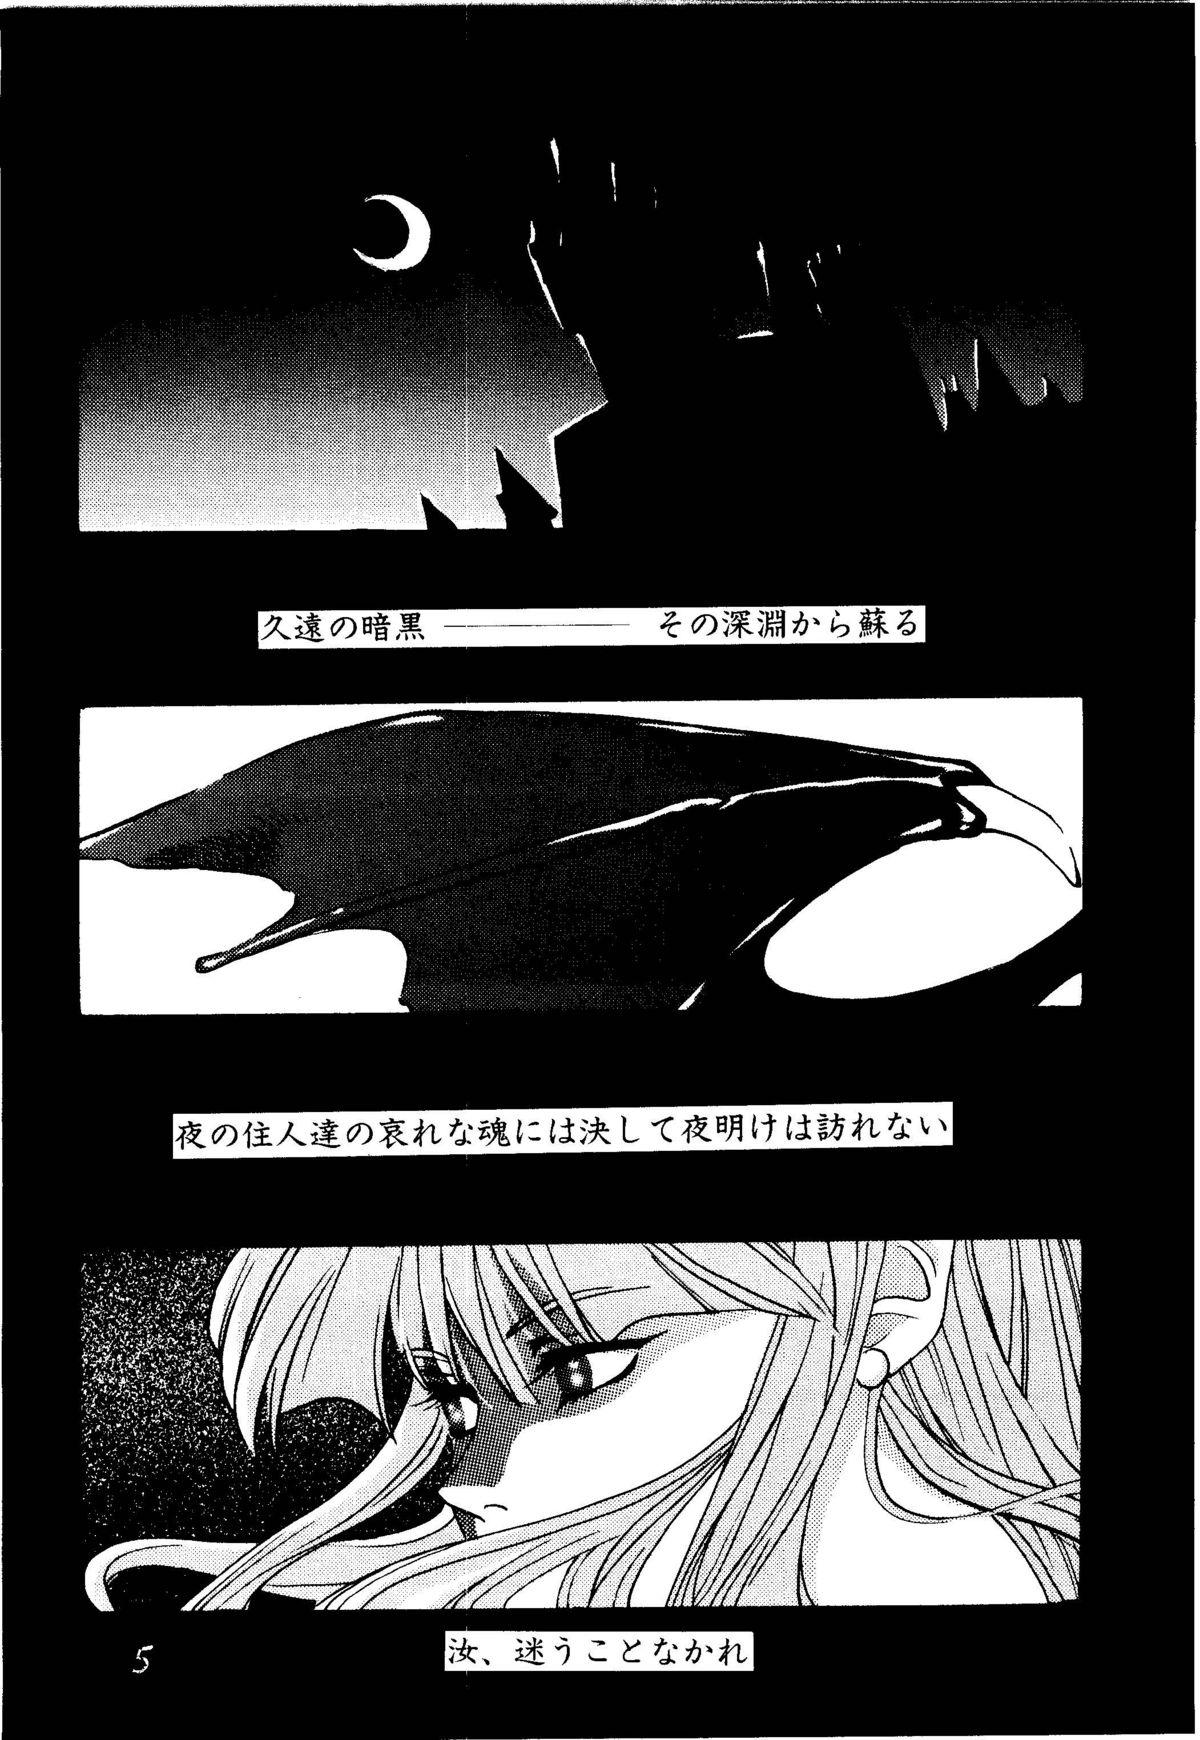 Gaypawn Fire and Ice - Darkstalkers Usa - Page 5